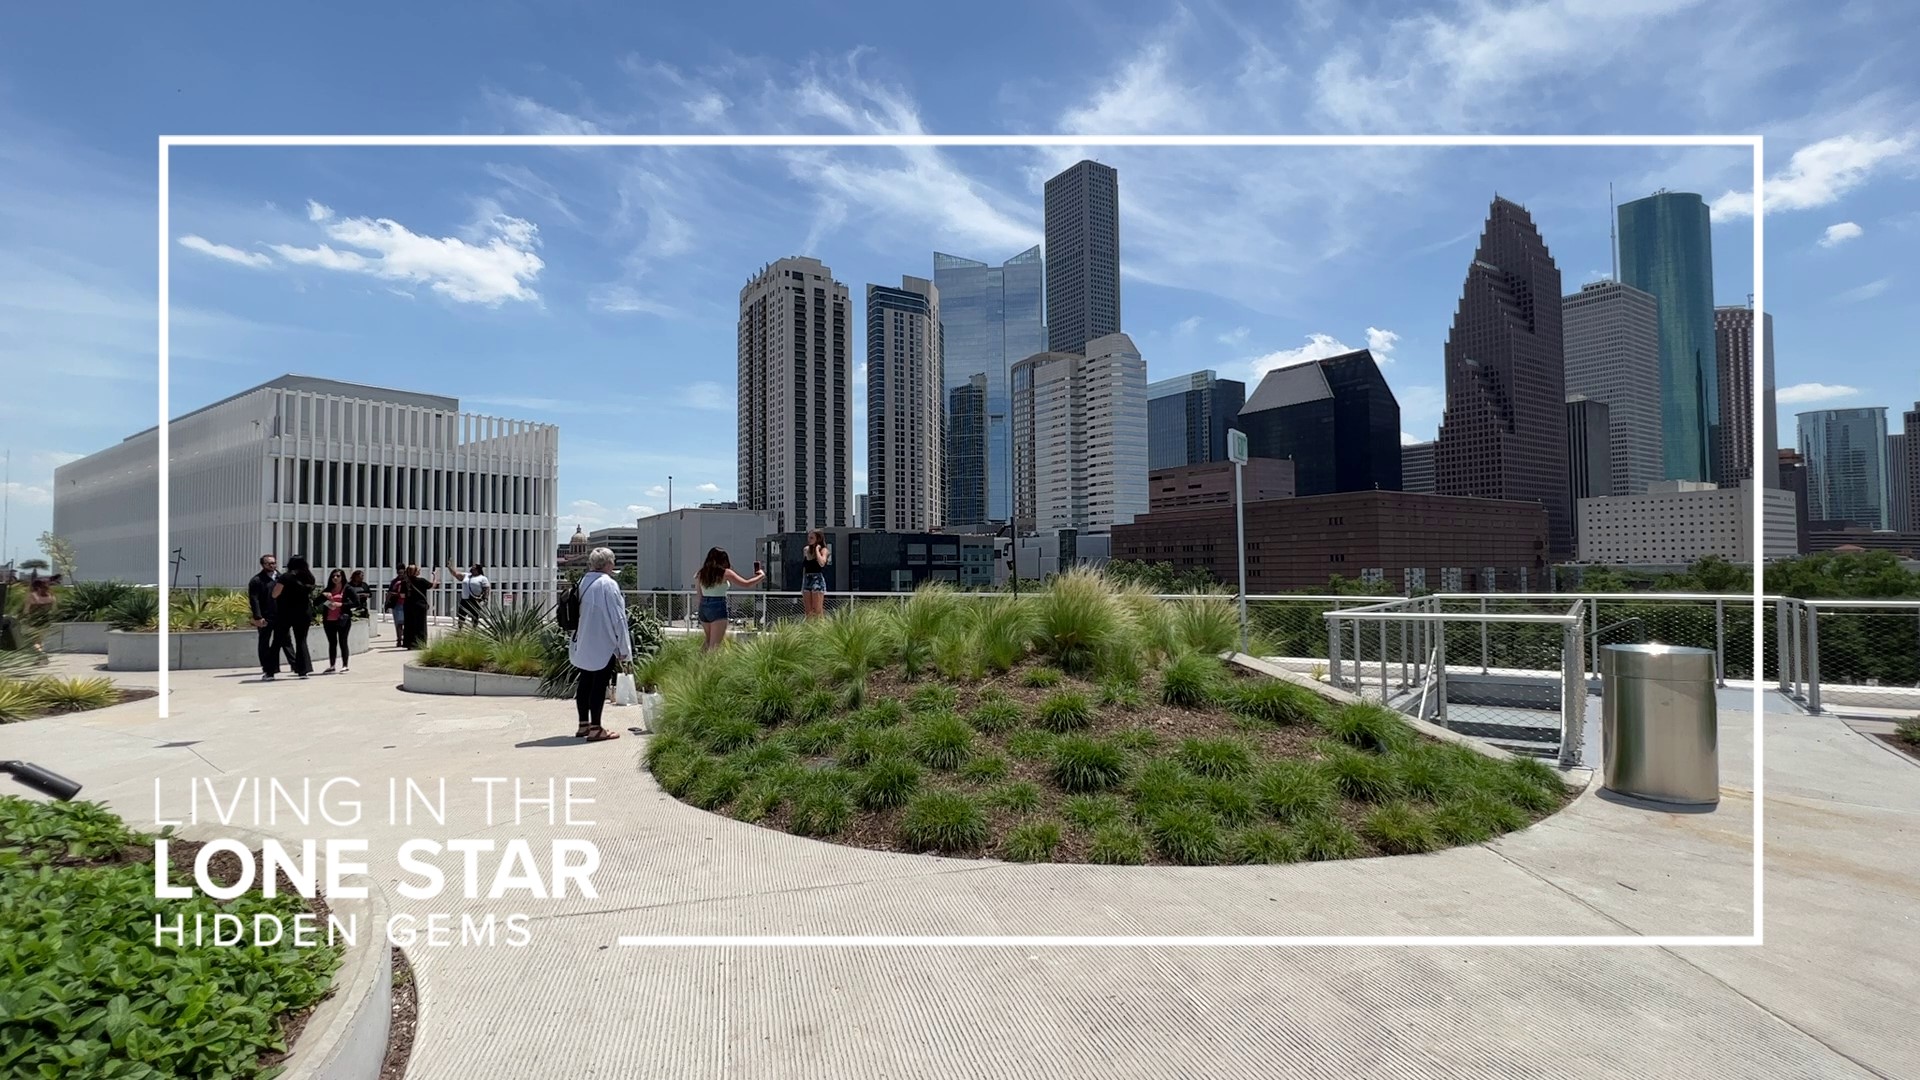 The rooftop getaway was created as part of POST Houston, a mini-city that also includes a market full of restaurants and retailers and 713 Music Hall.